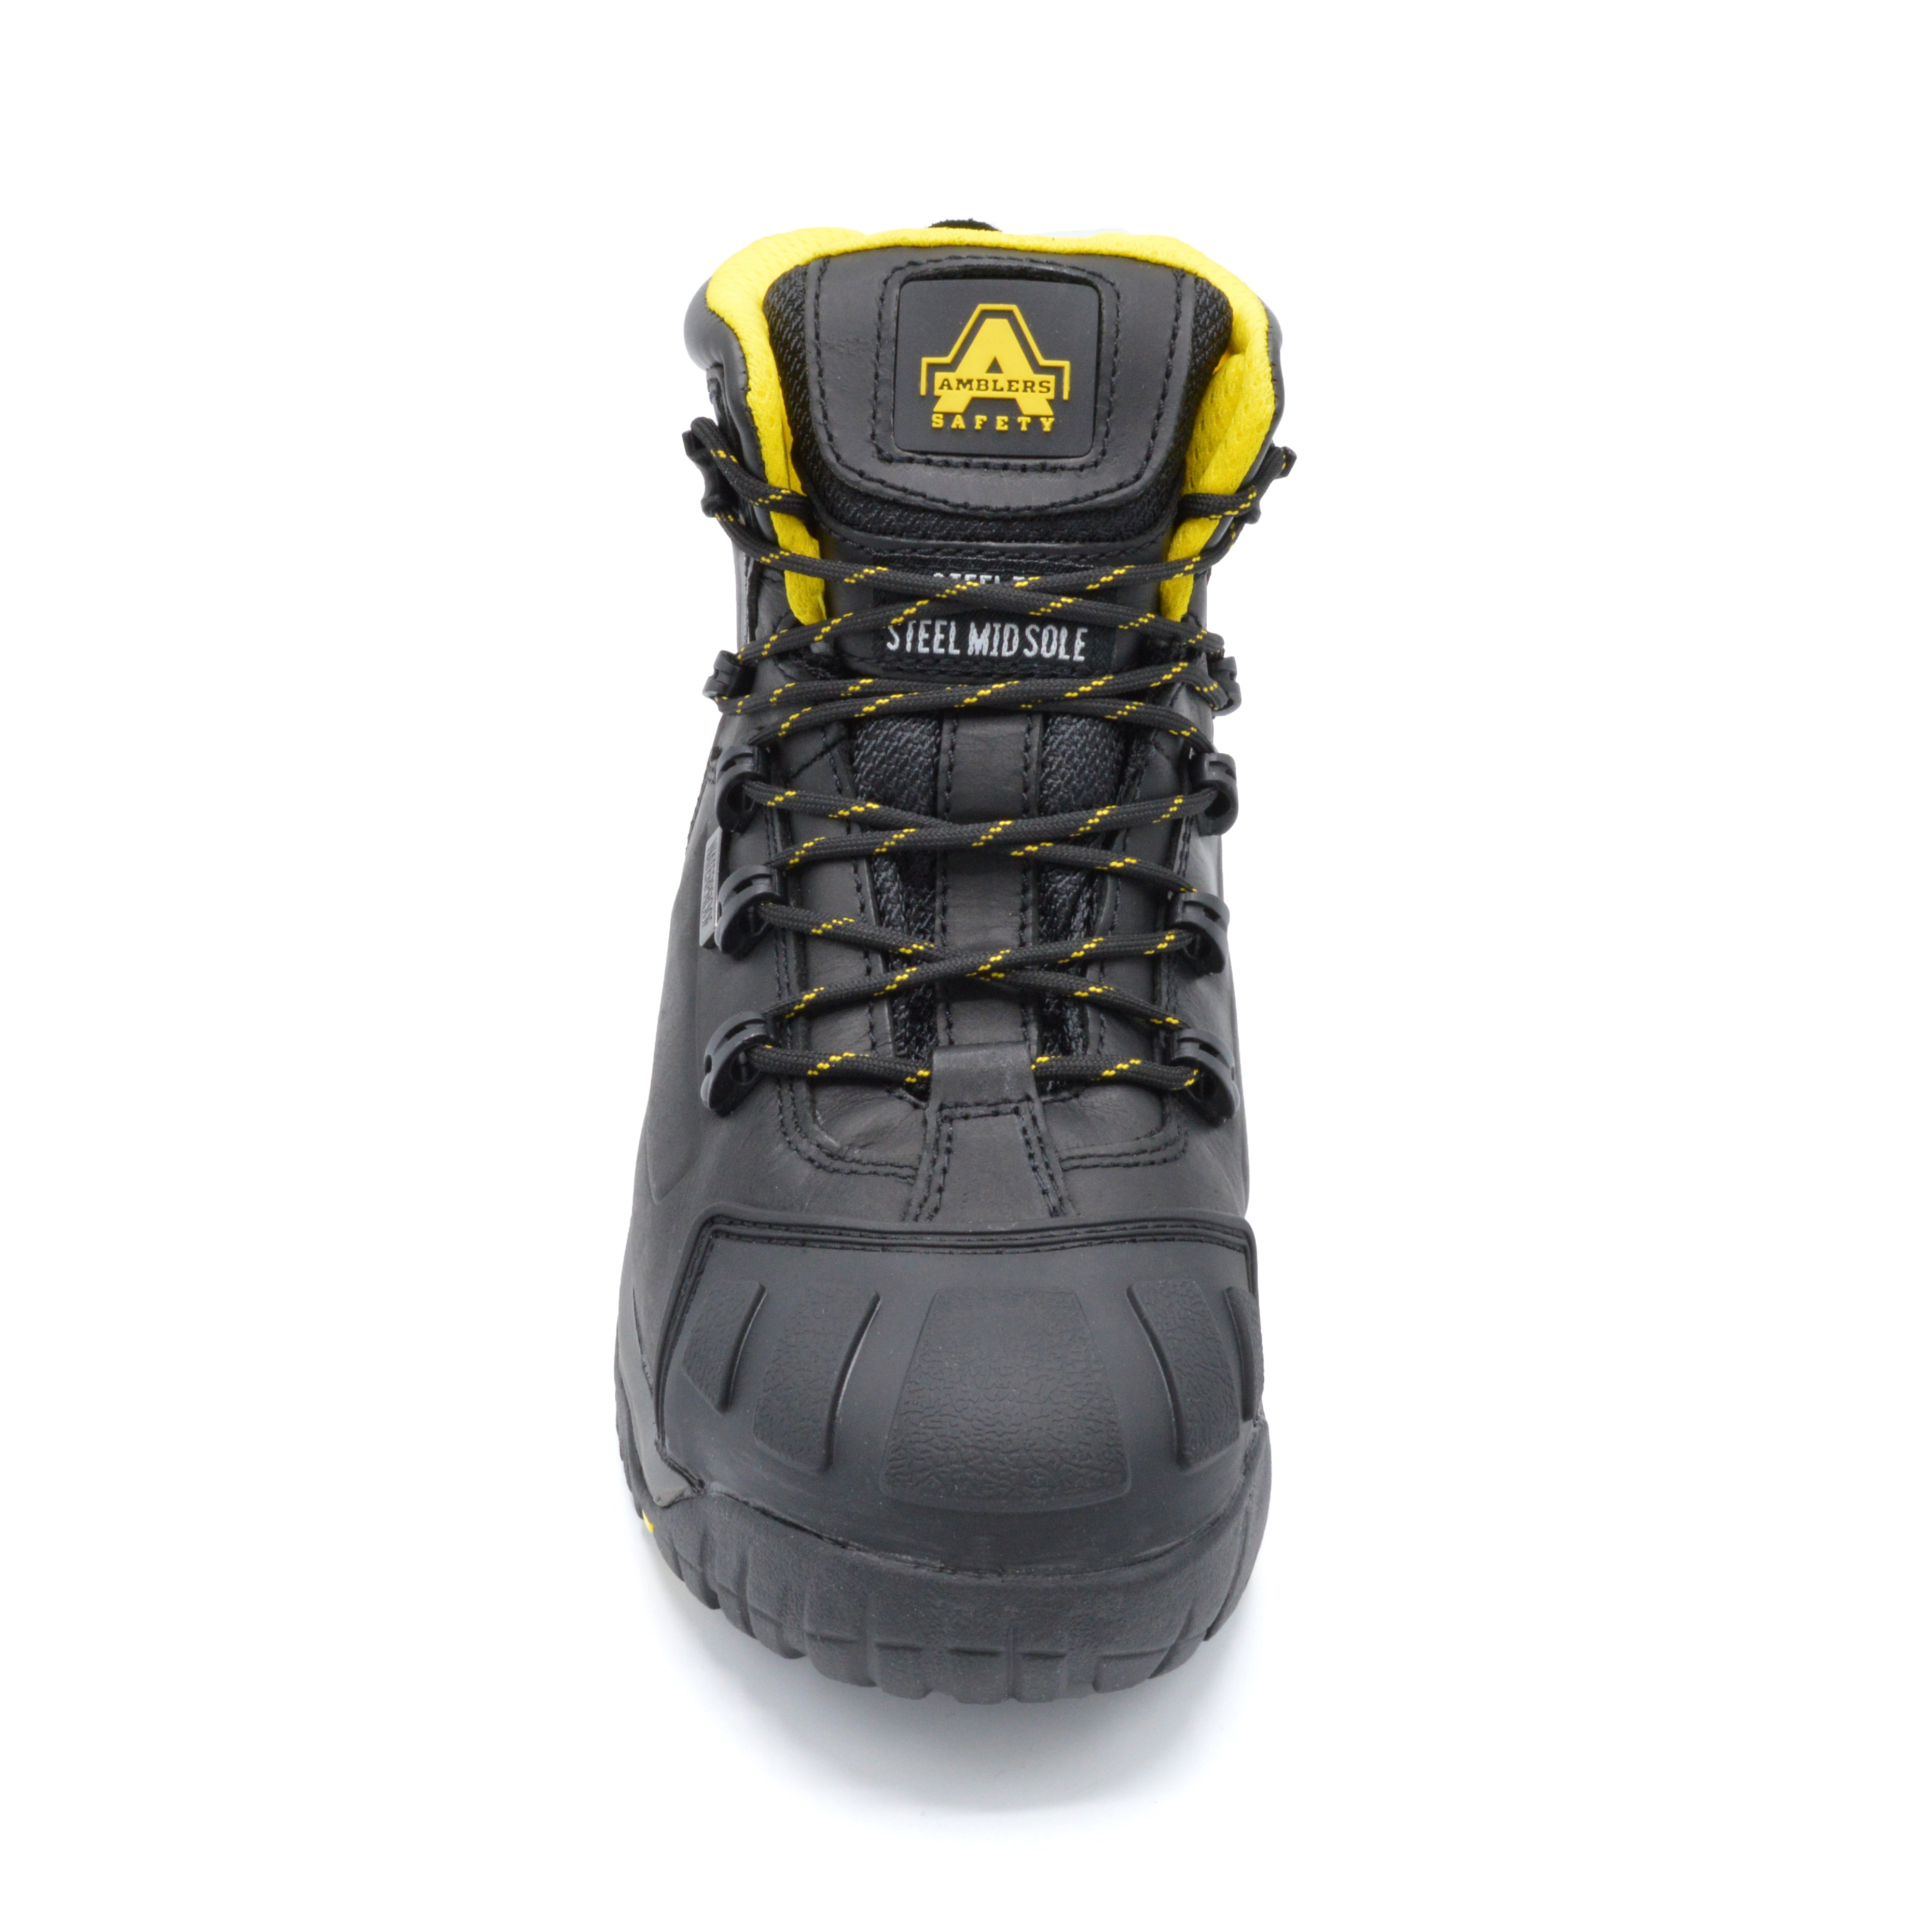 Extra-wide EE Fit Waterproof Safety Boot